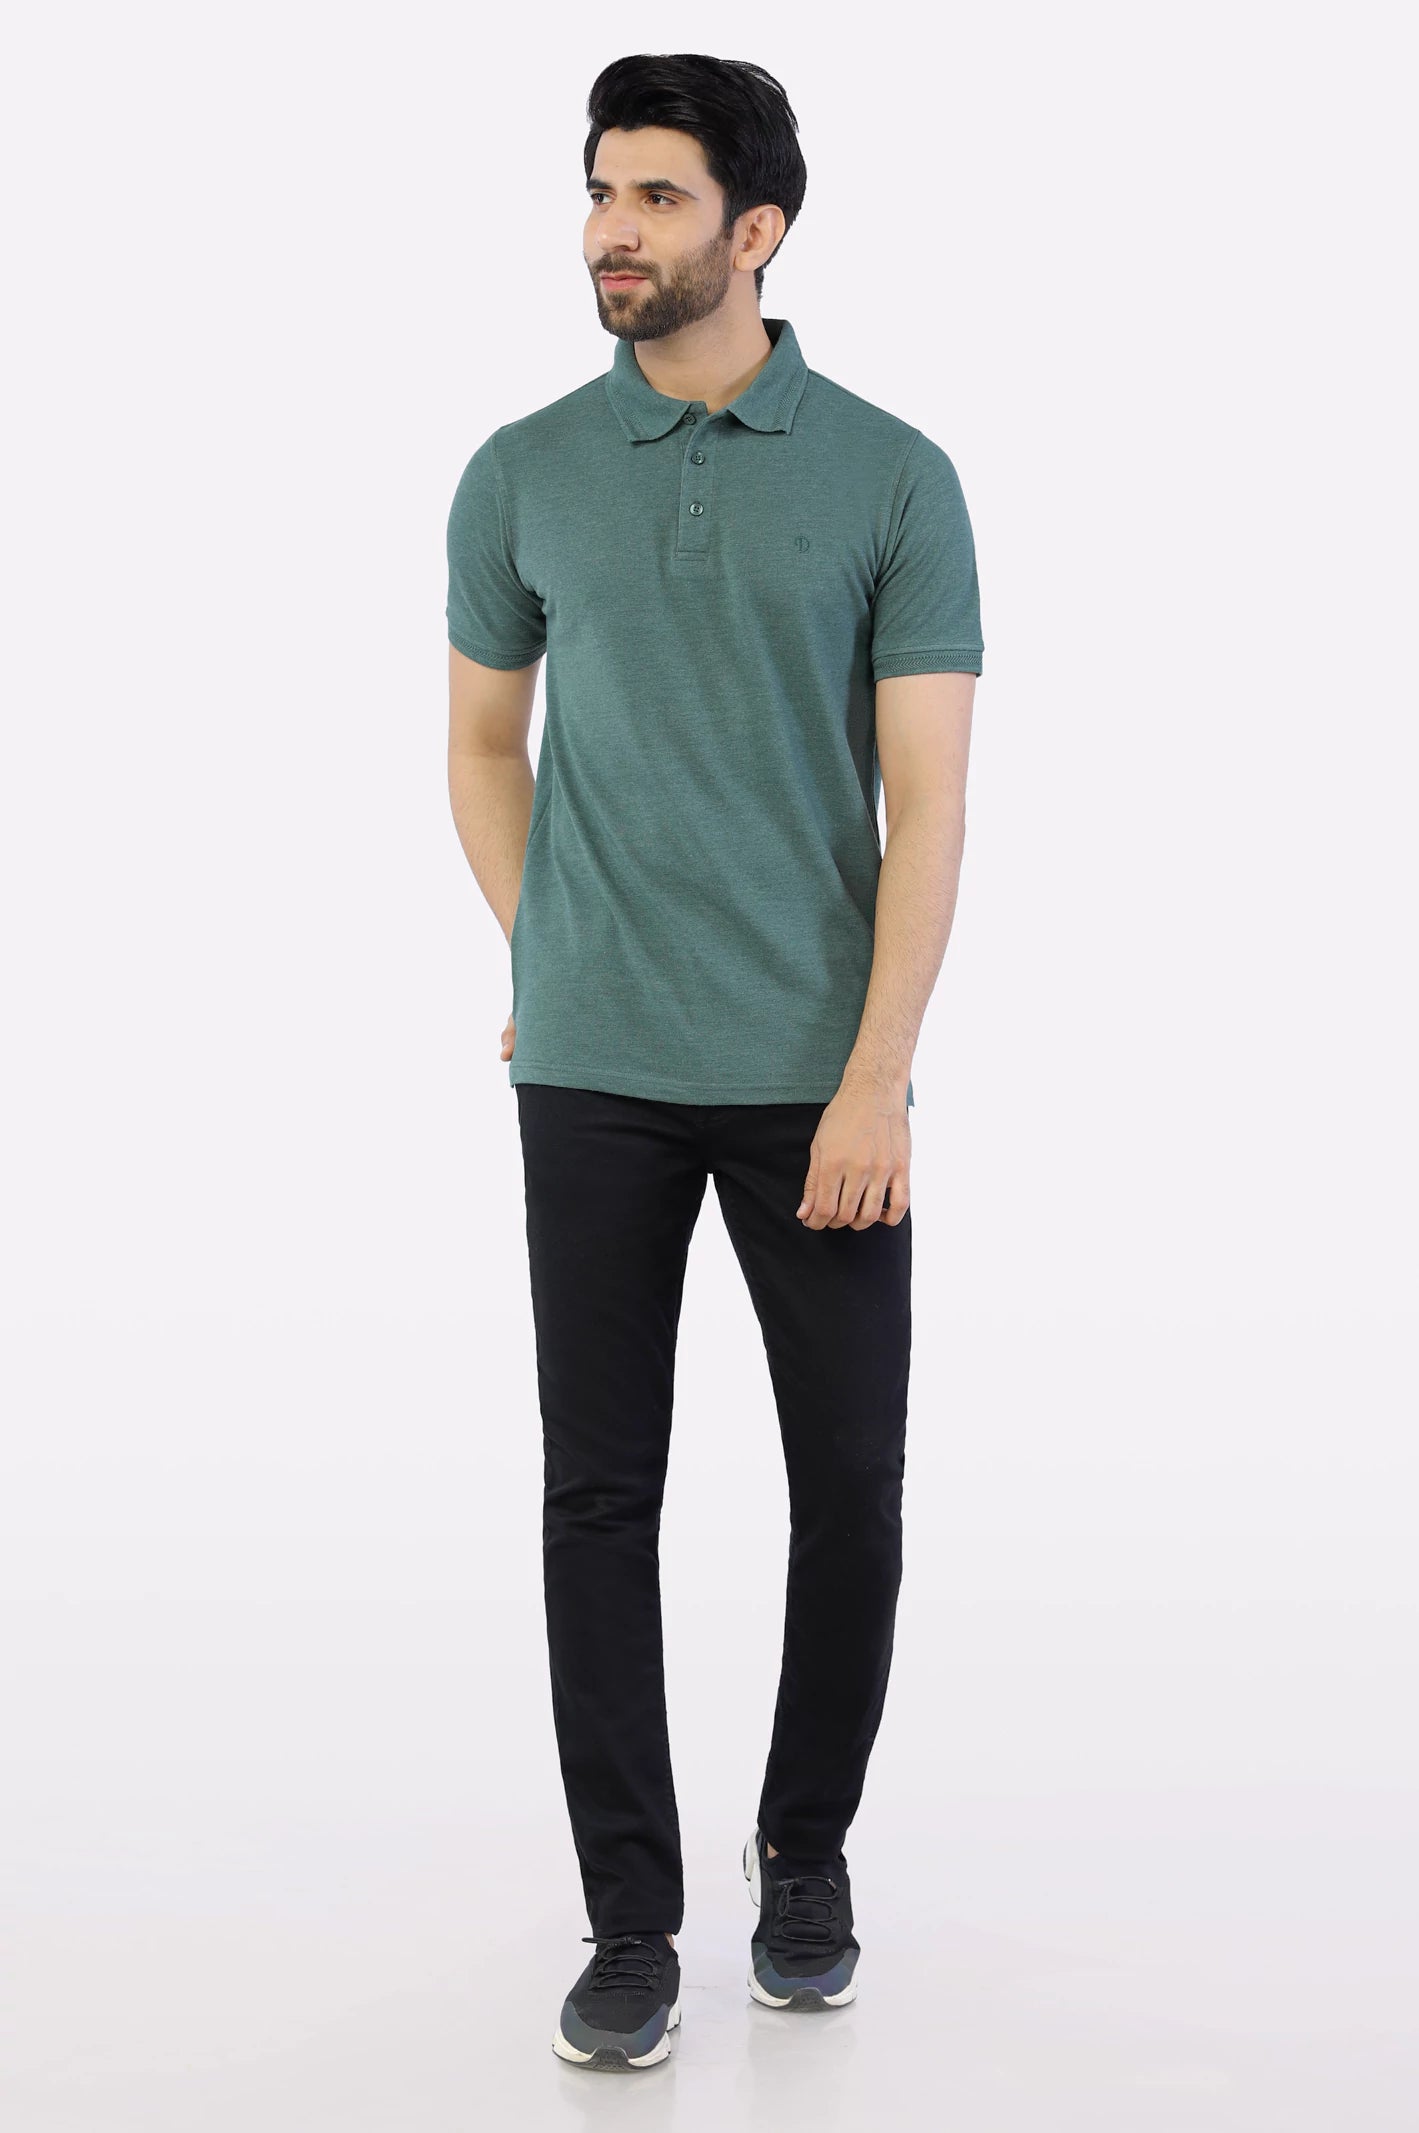 Heather Green Jacquard Collar Polo From Diners